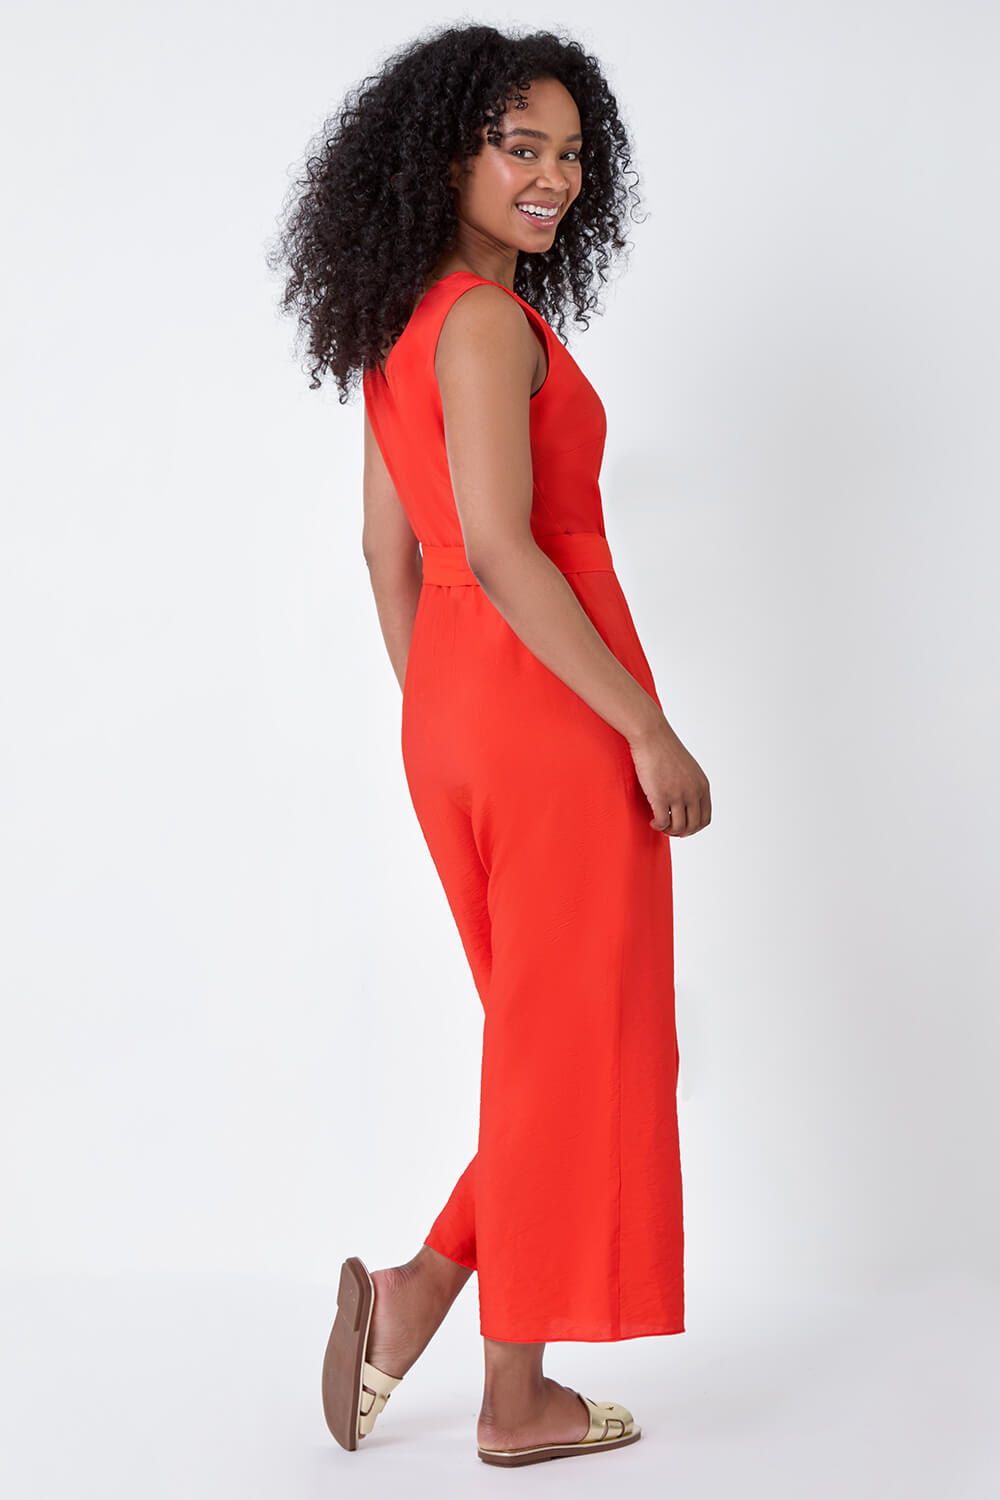 CORAL Petite Sleeveless Button Front Jumpsuit, Image 3 of 5